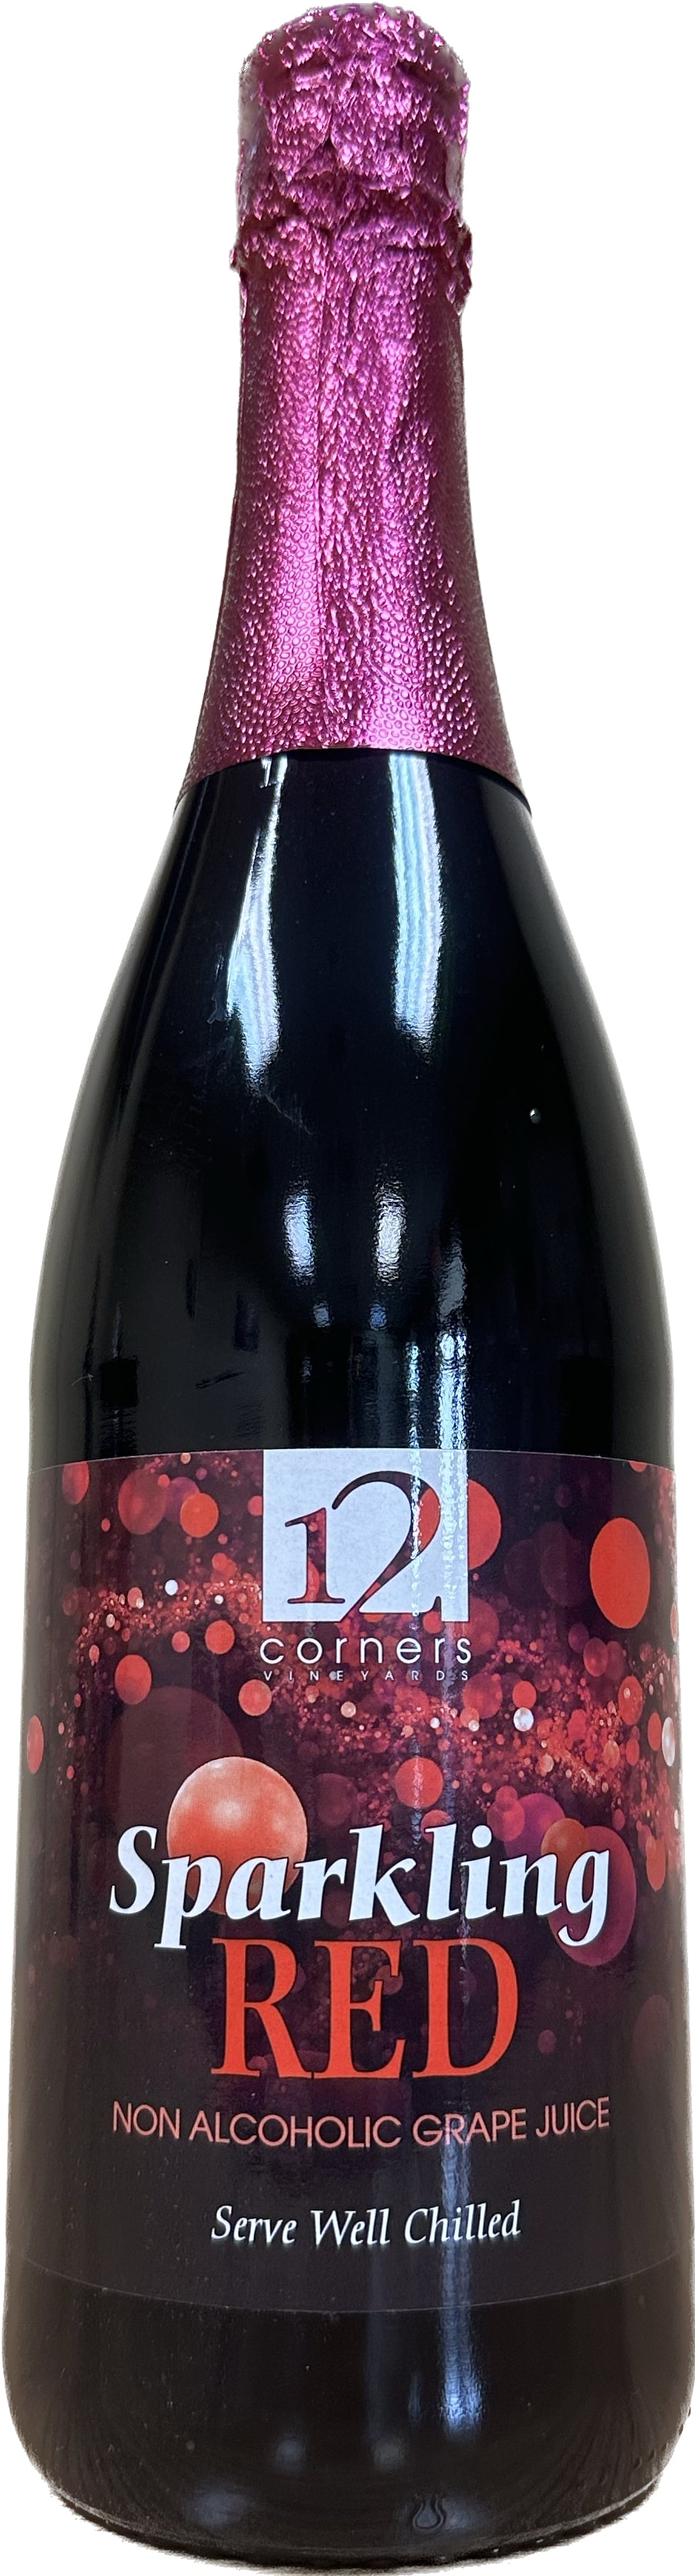 Product Image for Non-Alcoholic Sparkling Red